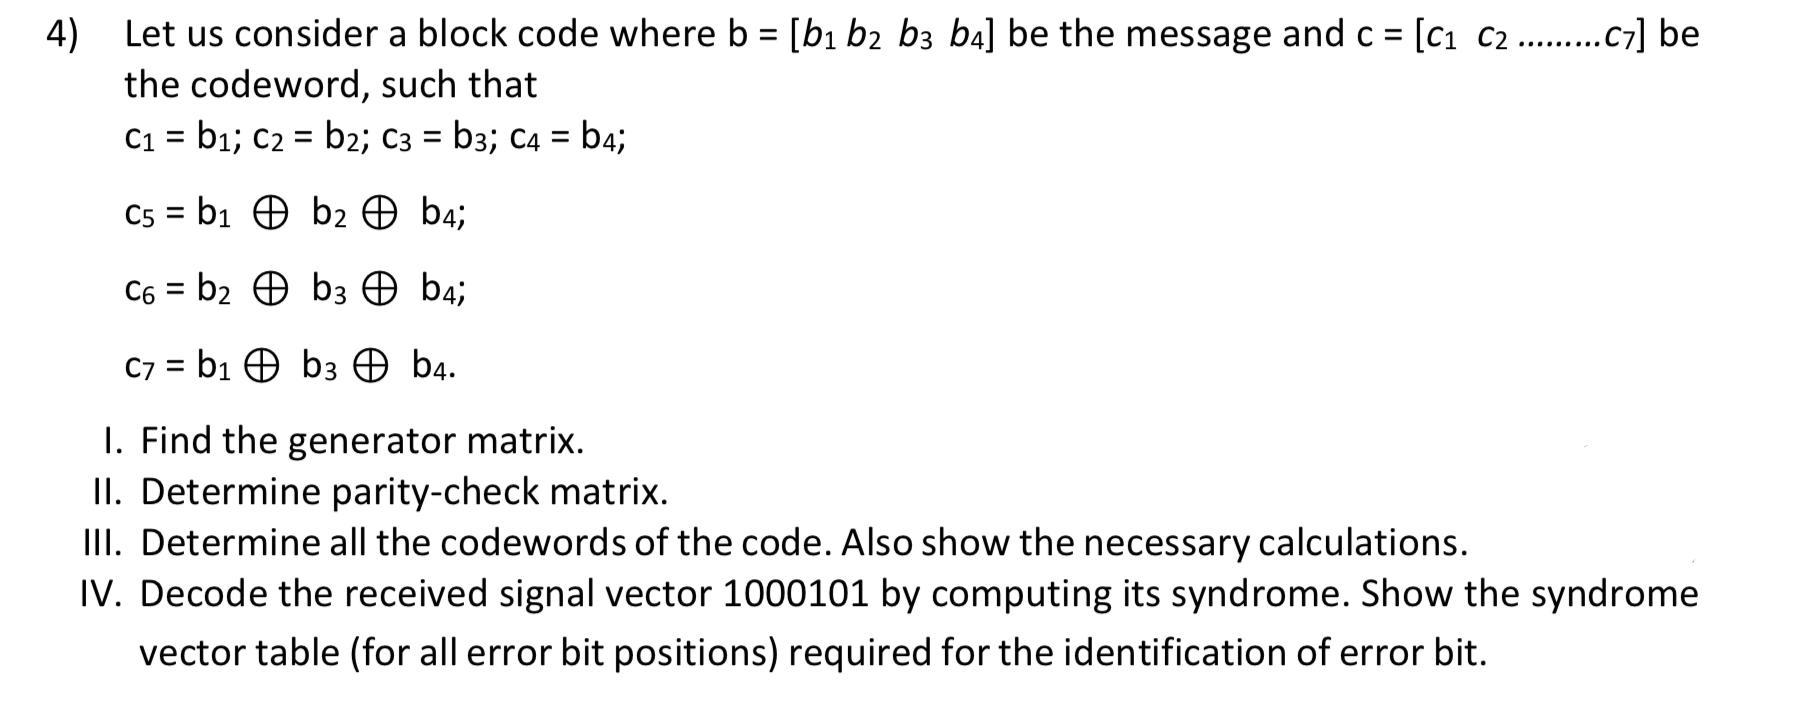 4) Let us consider a block code where b = [b b2 b3 b4] be the message and c = [C C2 .........C7] be the